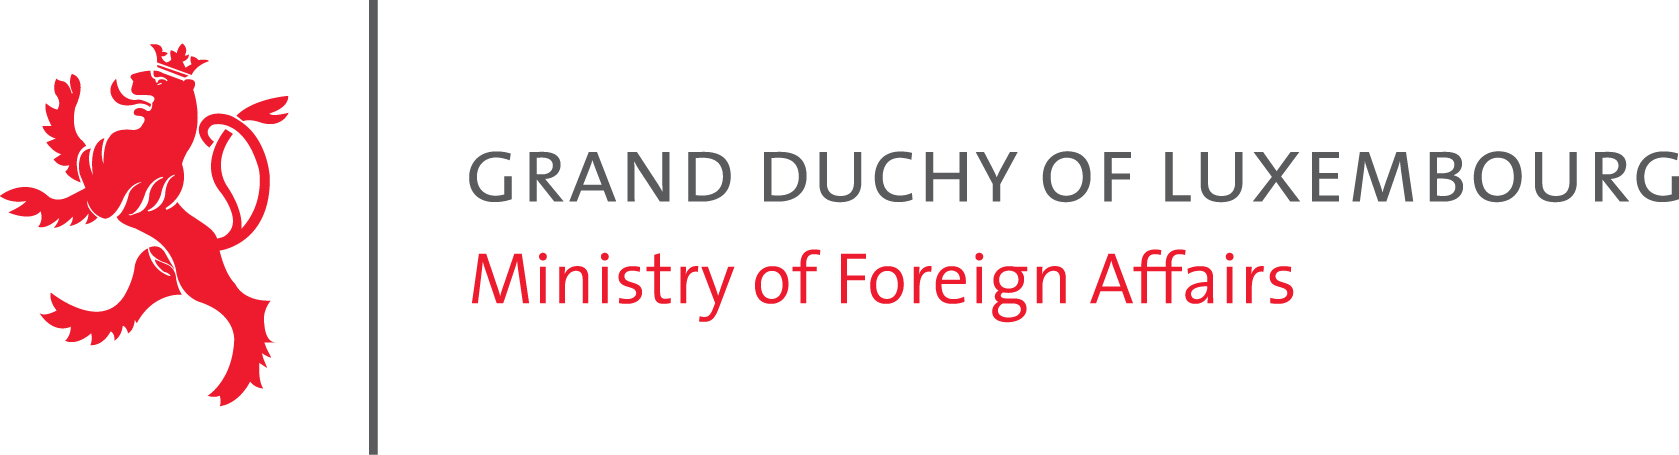 Grand Duchy of Luxembourg, Ministry of Foreign Affairs